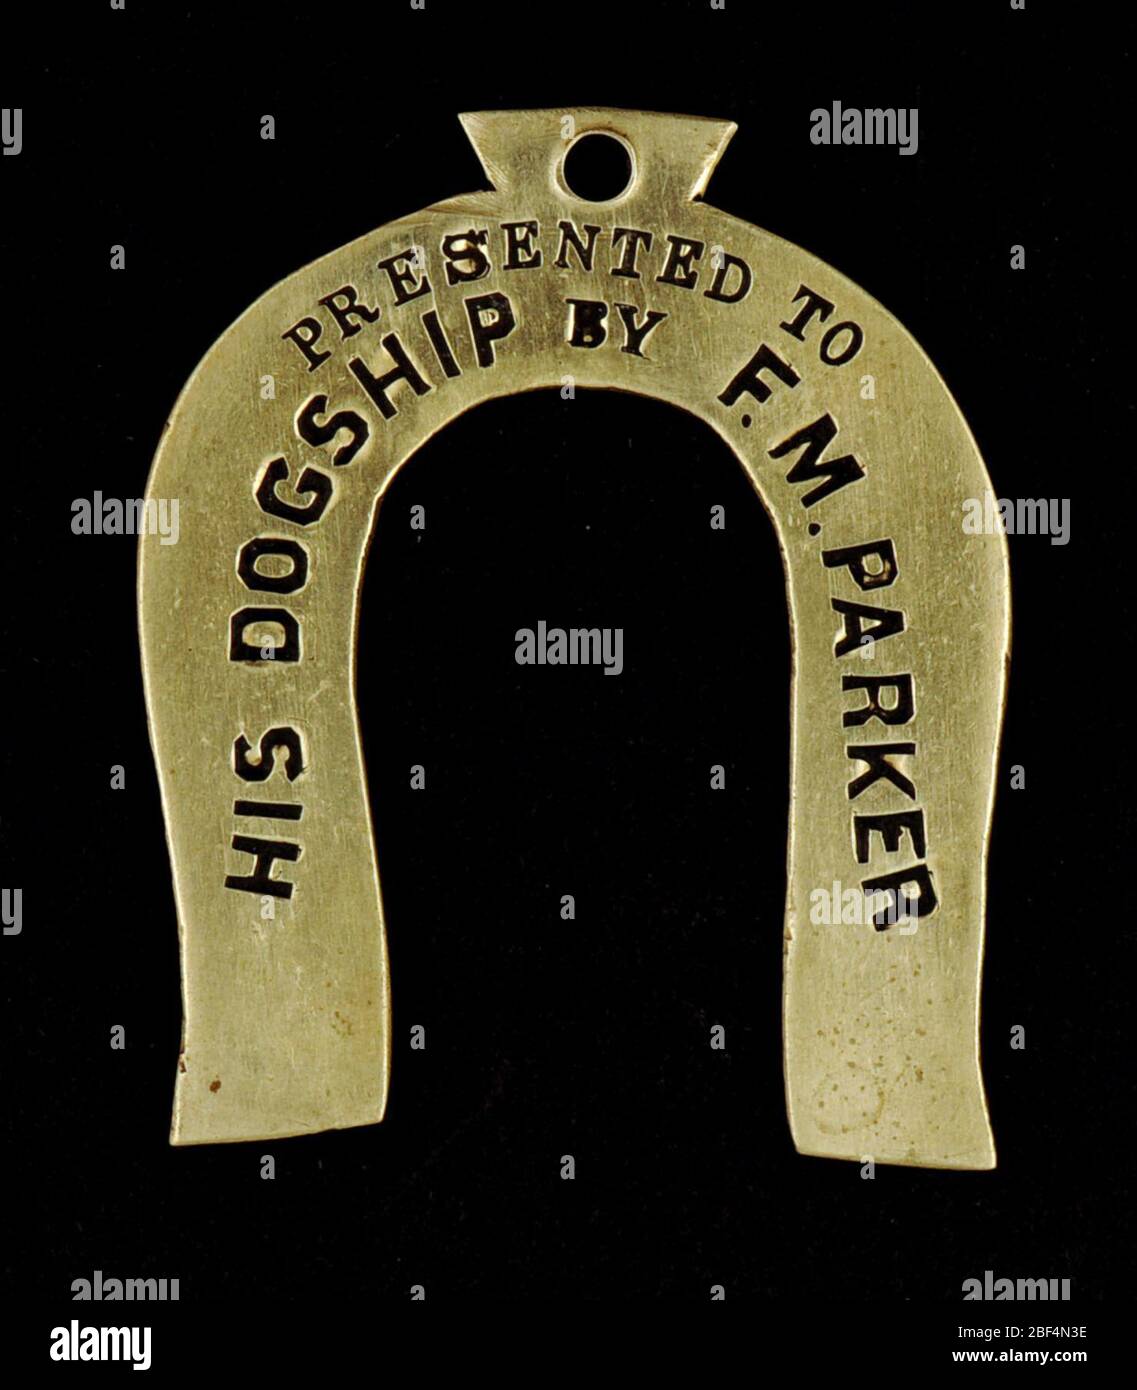 Baltimore and Grafton Railway Owney tag. This horseshoe-shaped metal tag includes the inscription that it was presented to “His Dogship by F.M.Parker.” The reverse of the tag includes the date April 20, 1892, and the railway line, the Baltimore and Grafton Railway Post Office (RPO) car. Stock Photo